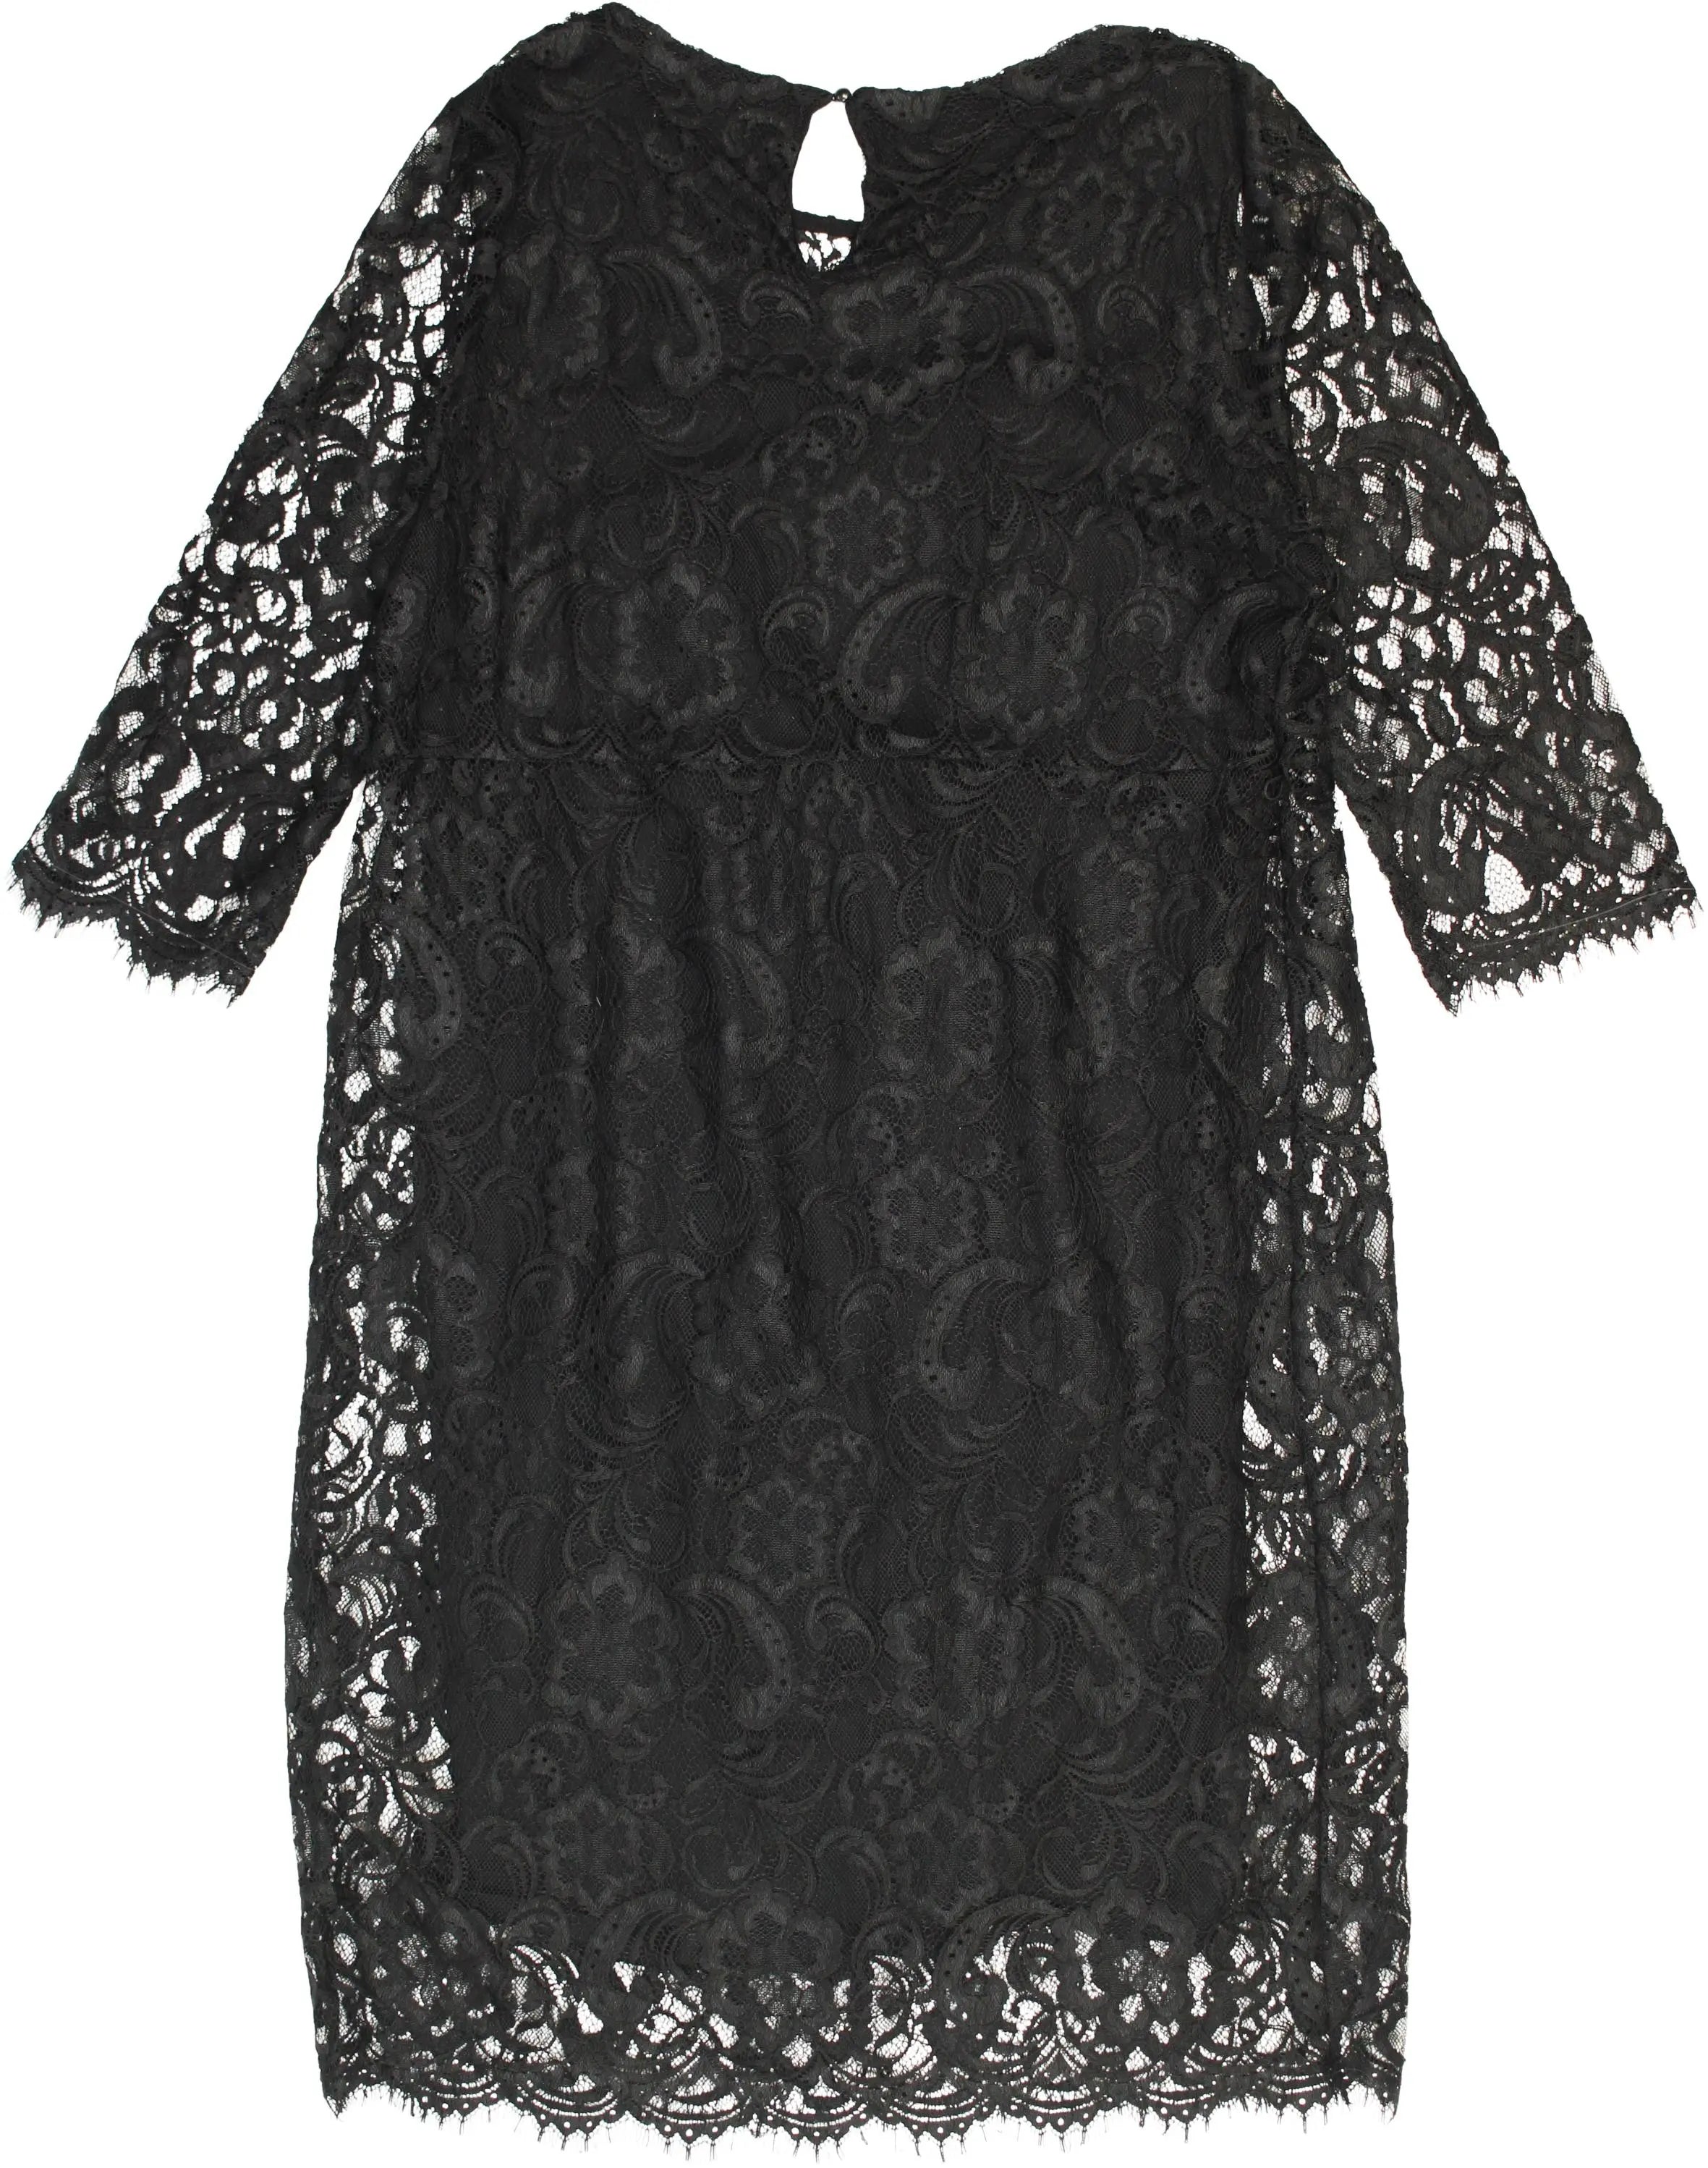 C&A - Black Lace Dress- ThriftTale.com - Vintage and second handclothing